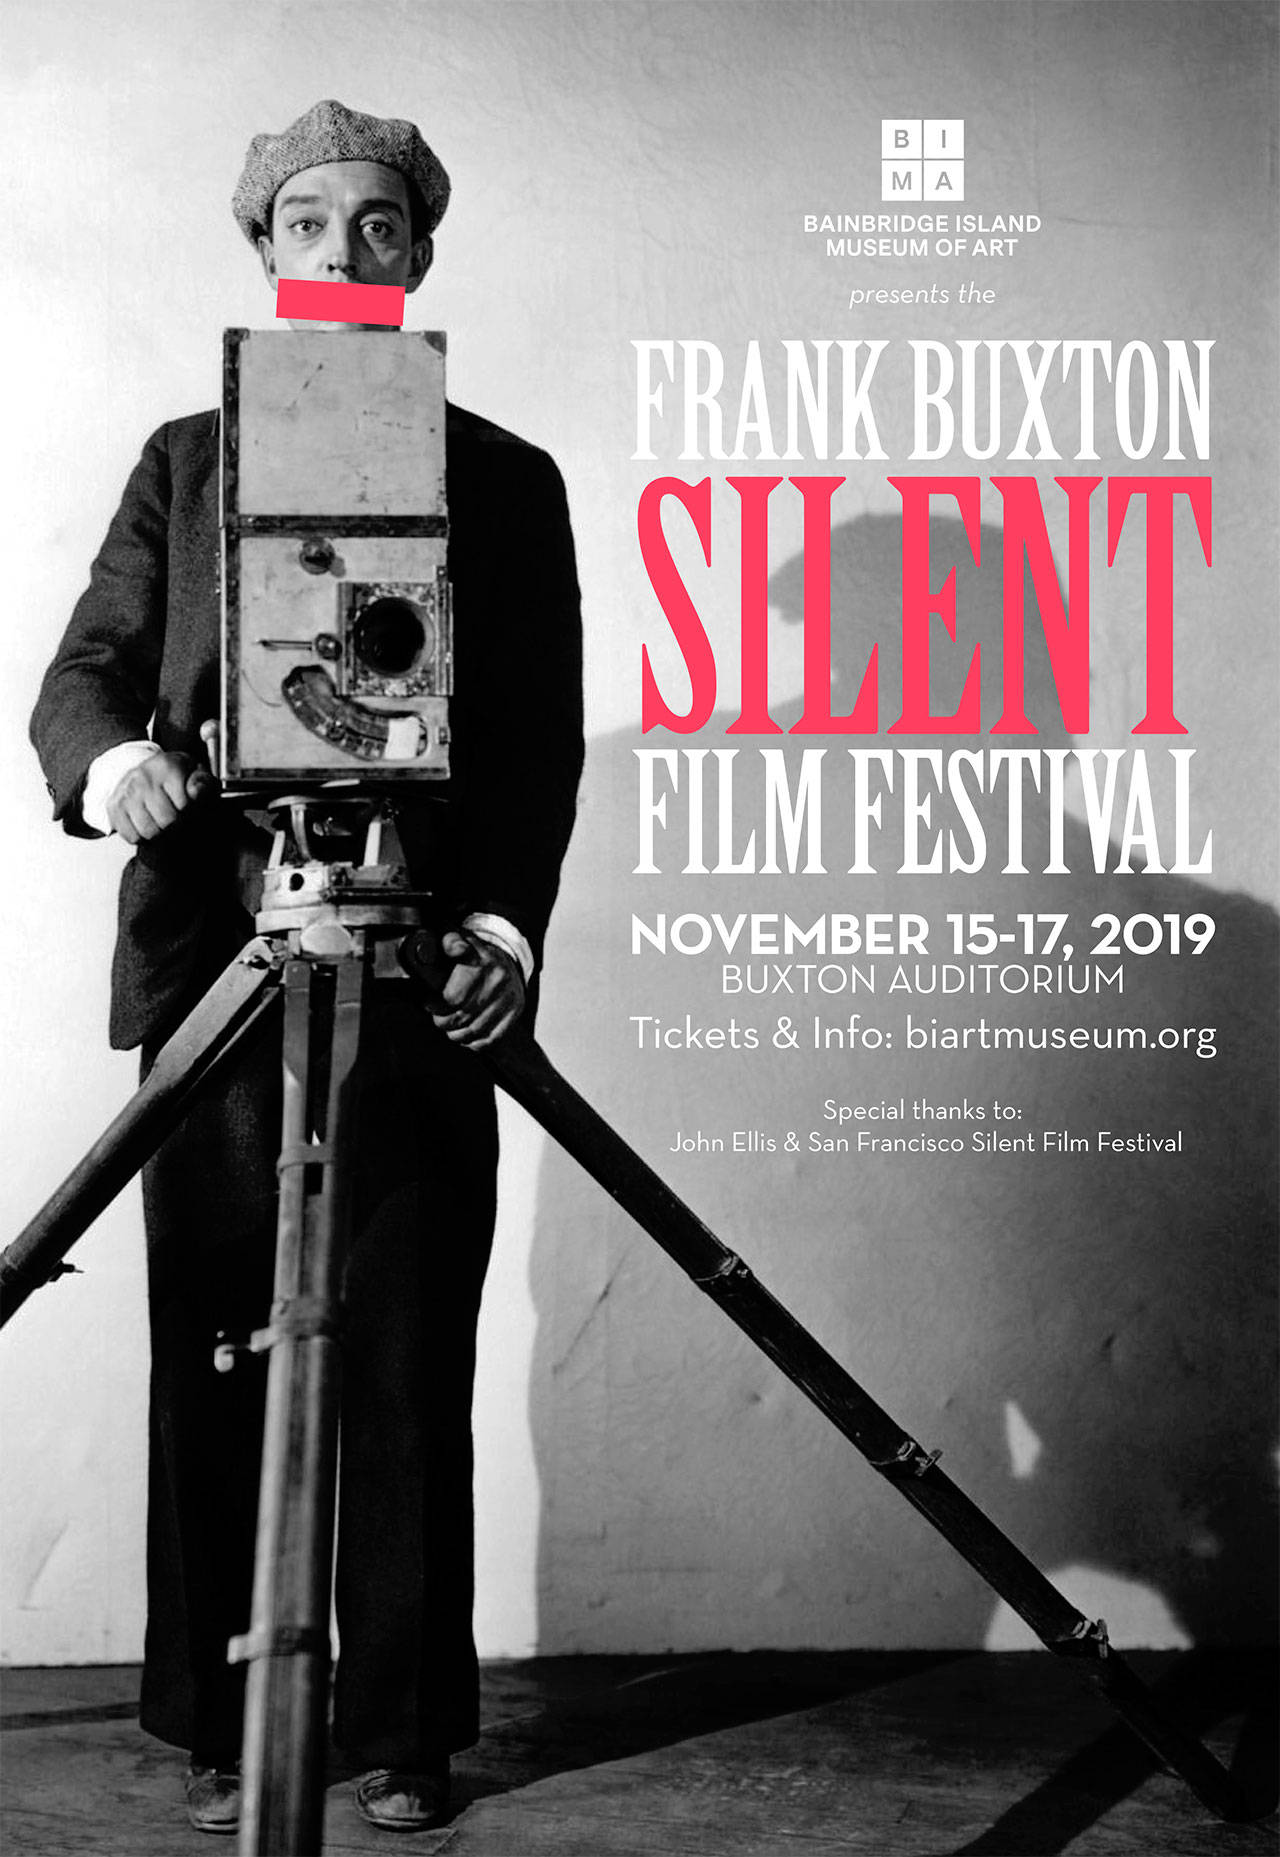 Image courtesy of Jesse Ziebart | The second annual Frank Buxton Silent Film Festival will again be held at the Bainbridge Island Museum of Art from Friday, Nov. 15 to Sunday, Nov. 17, with a lineup that includes a selection of both short and feature films curated by Island Treasure Award winner John Ellis.